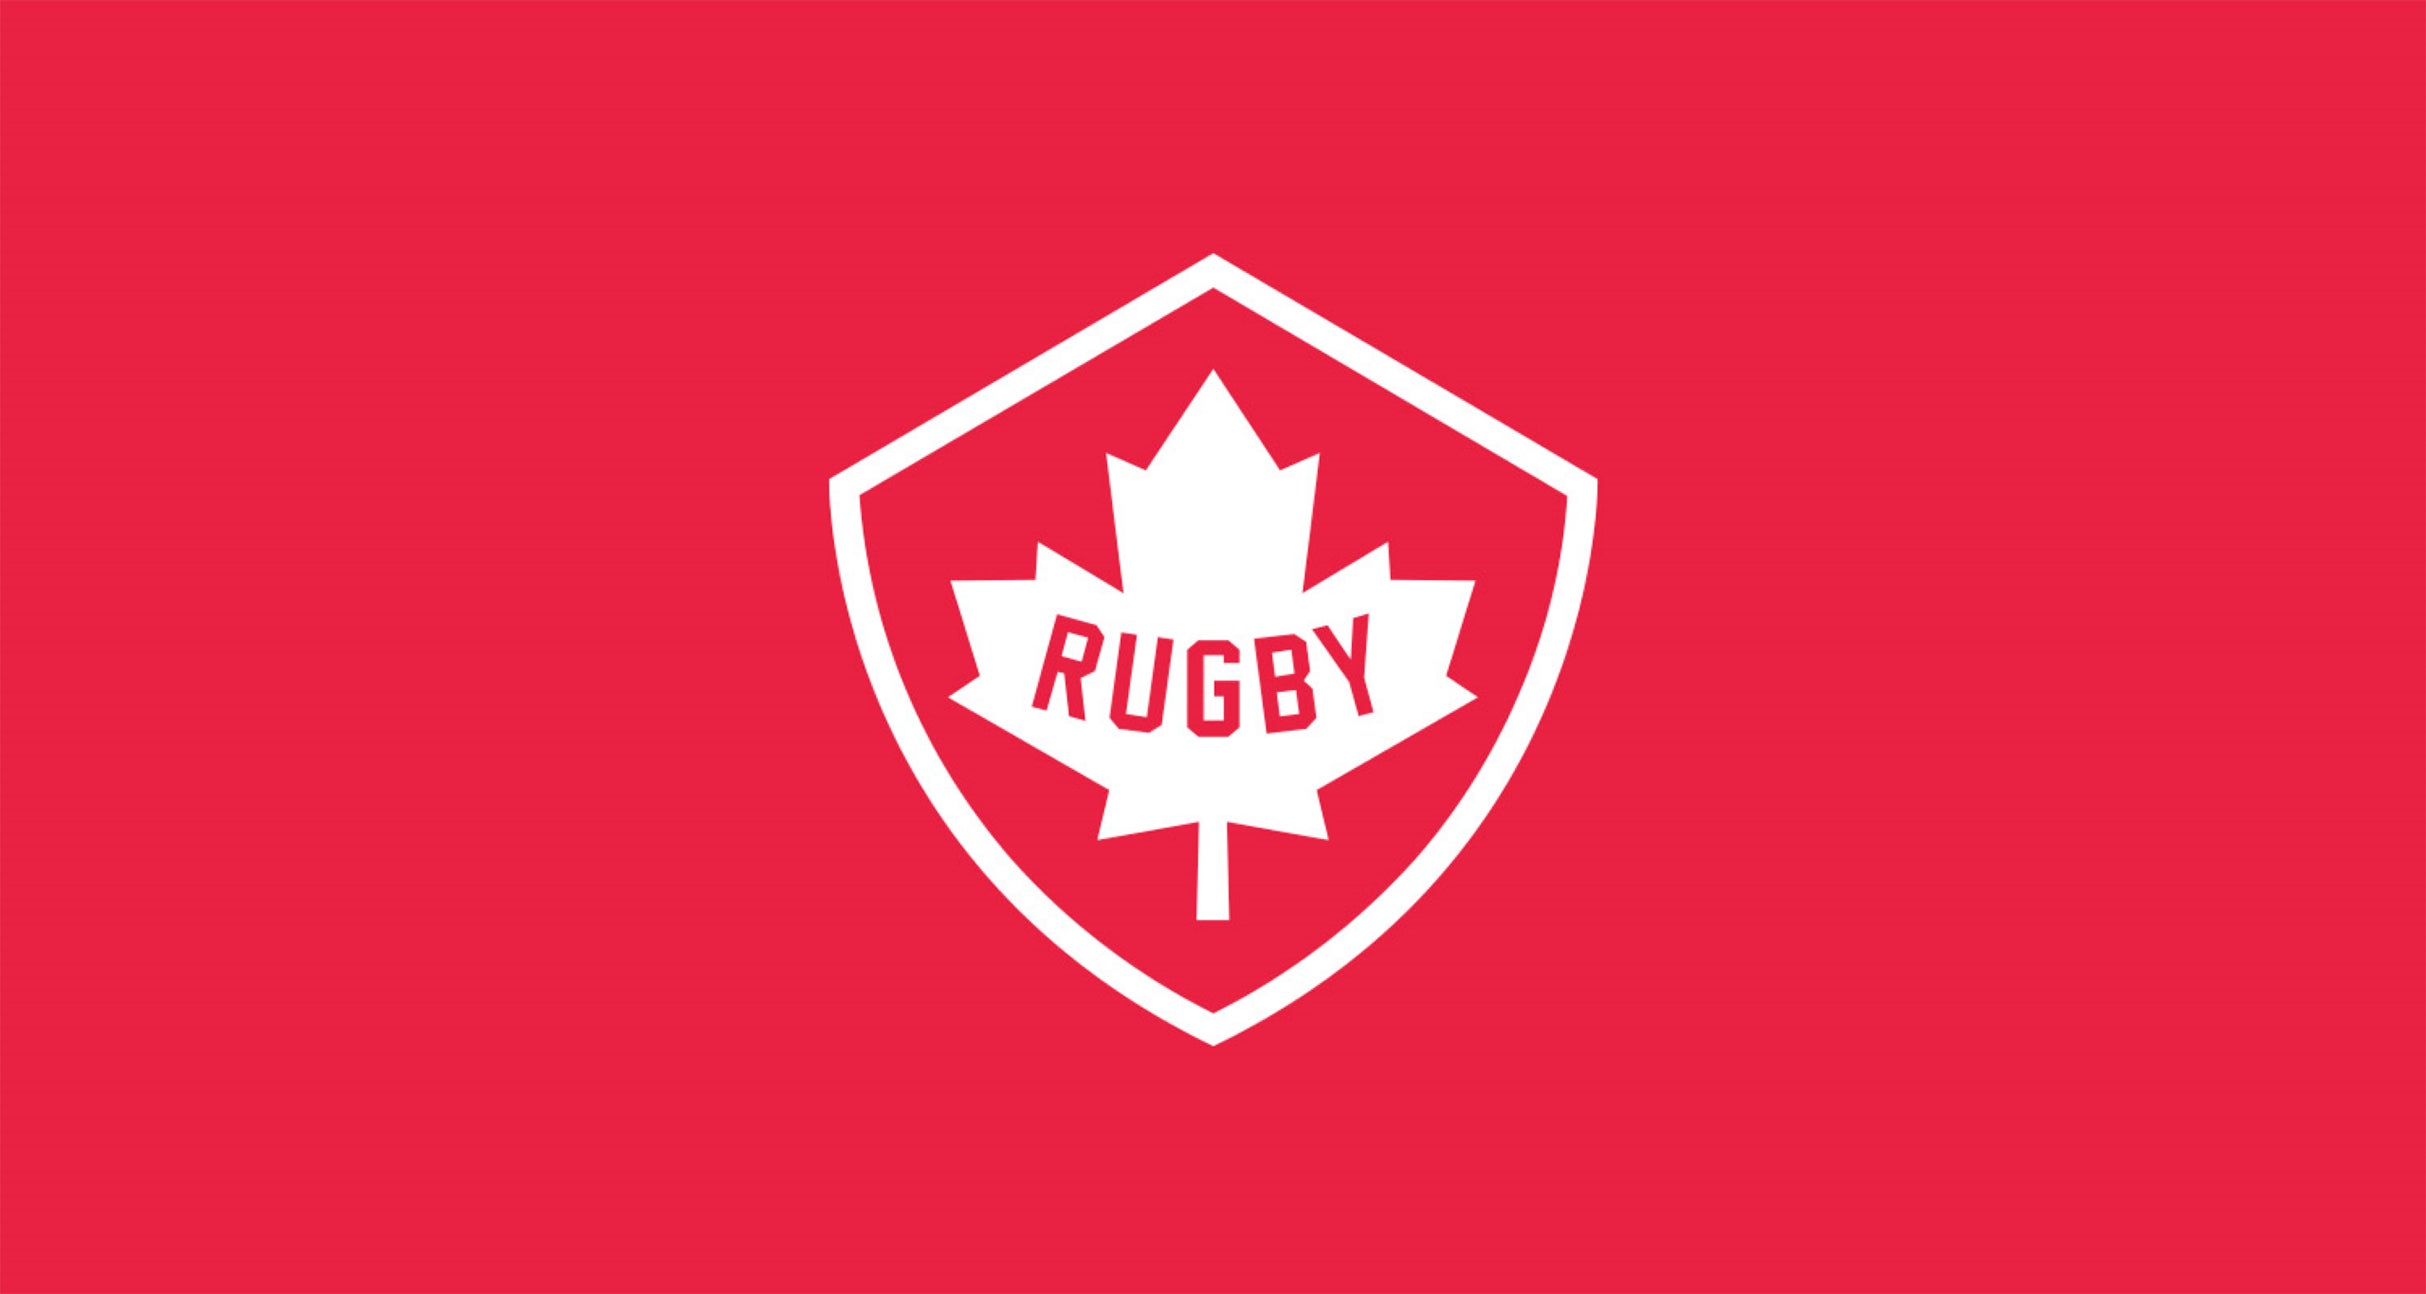 Canada Men's Rugby v. Romania in Ottawa promo photo for TD Place Insider presale offer code